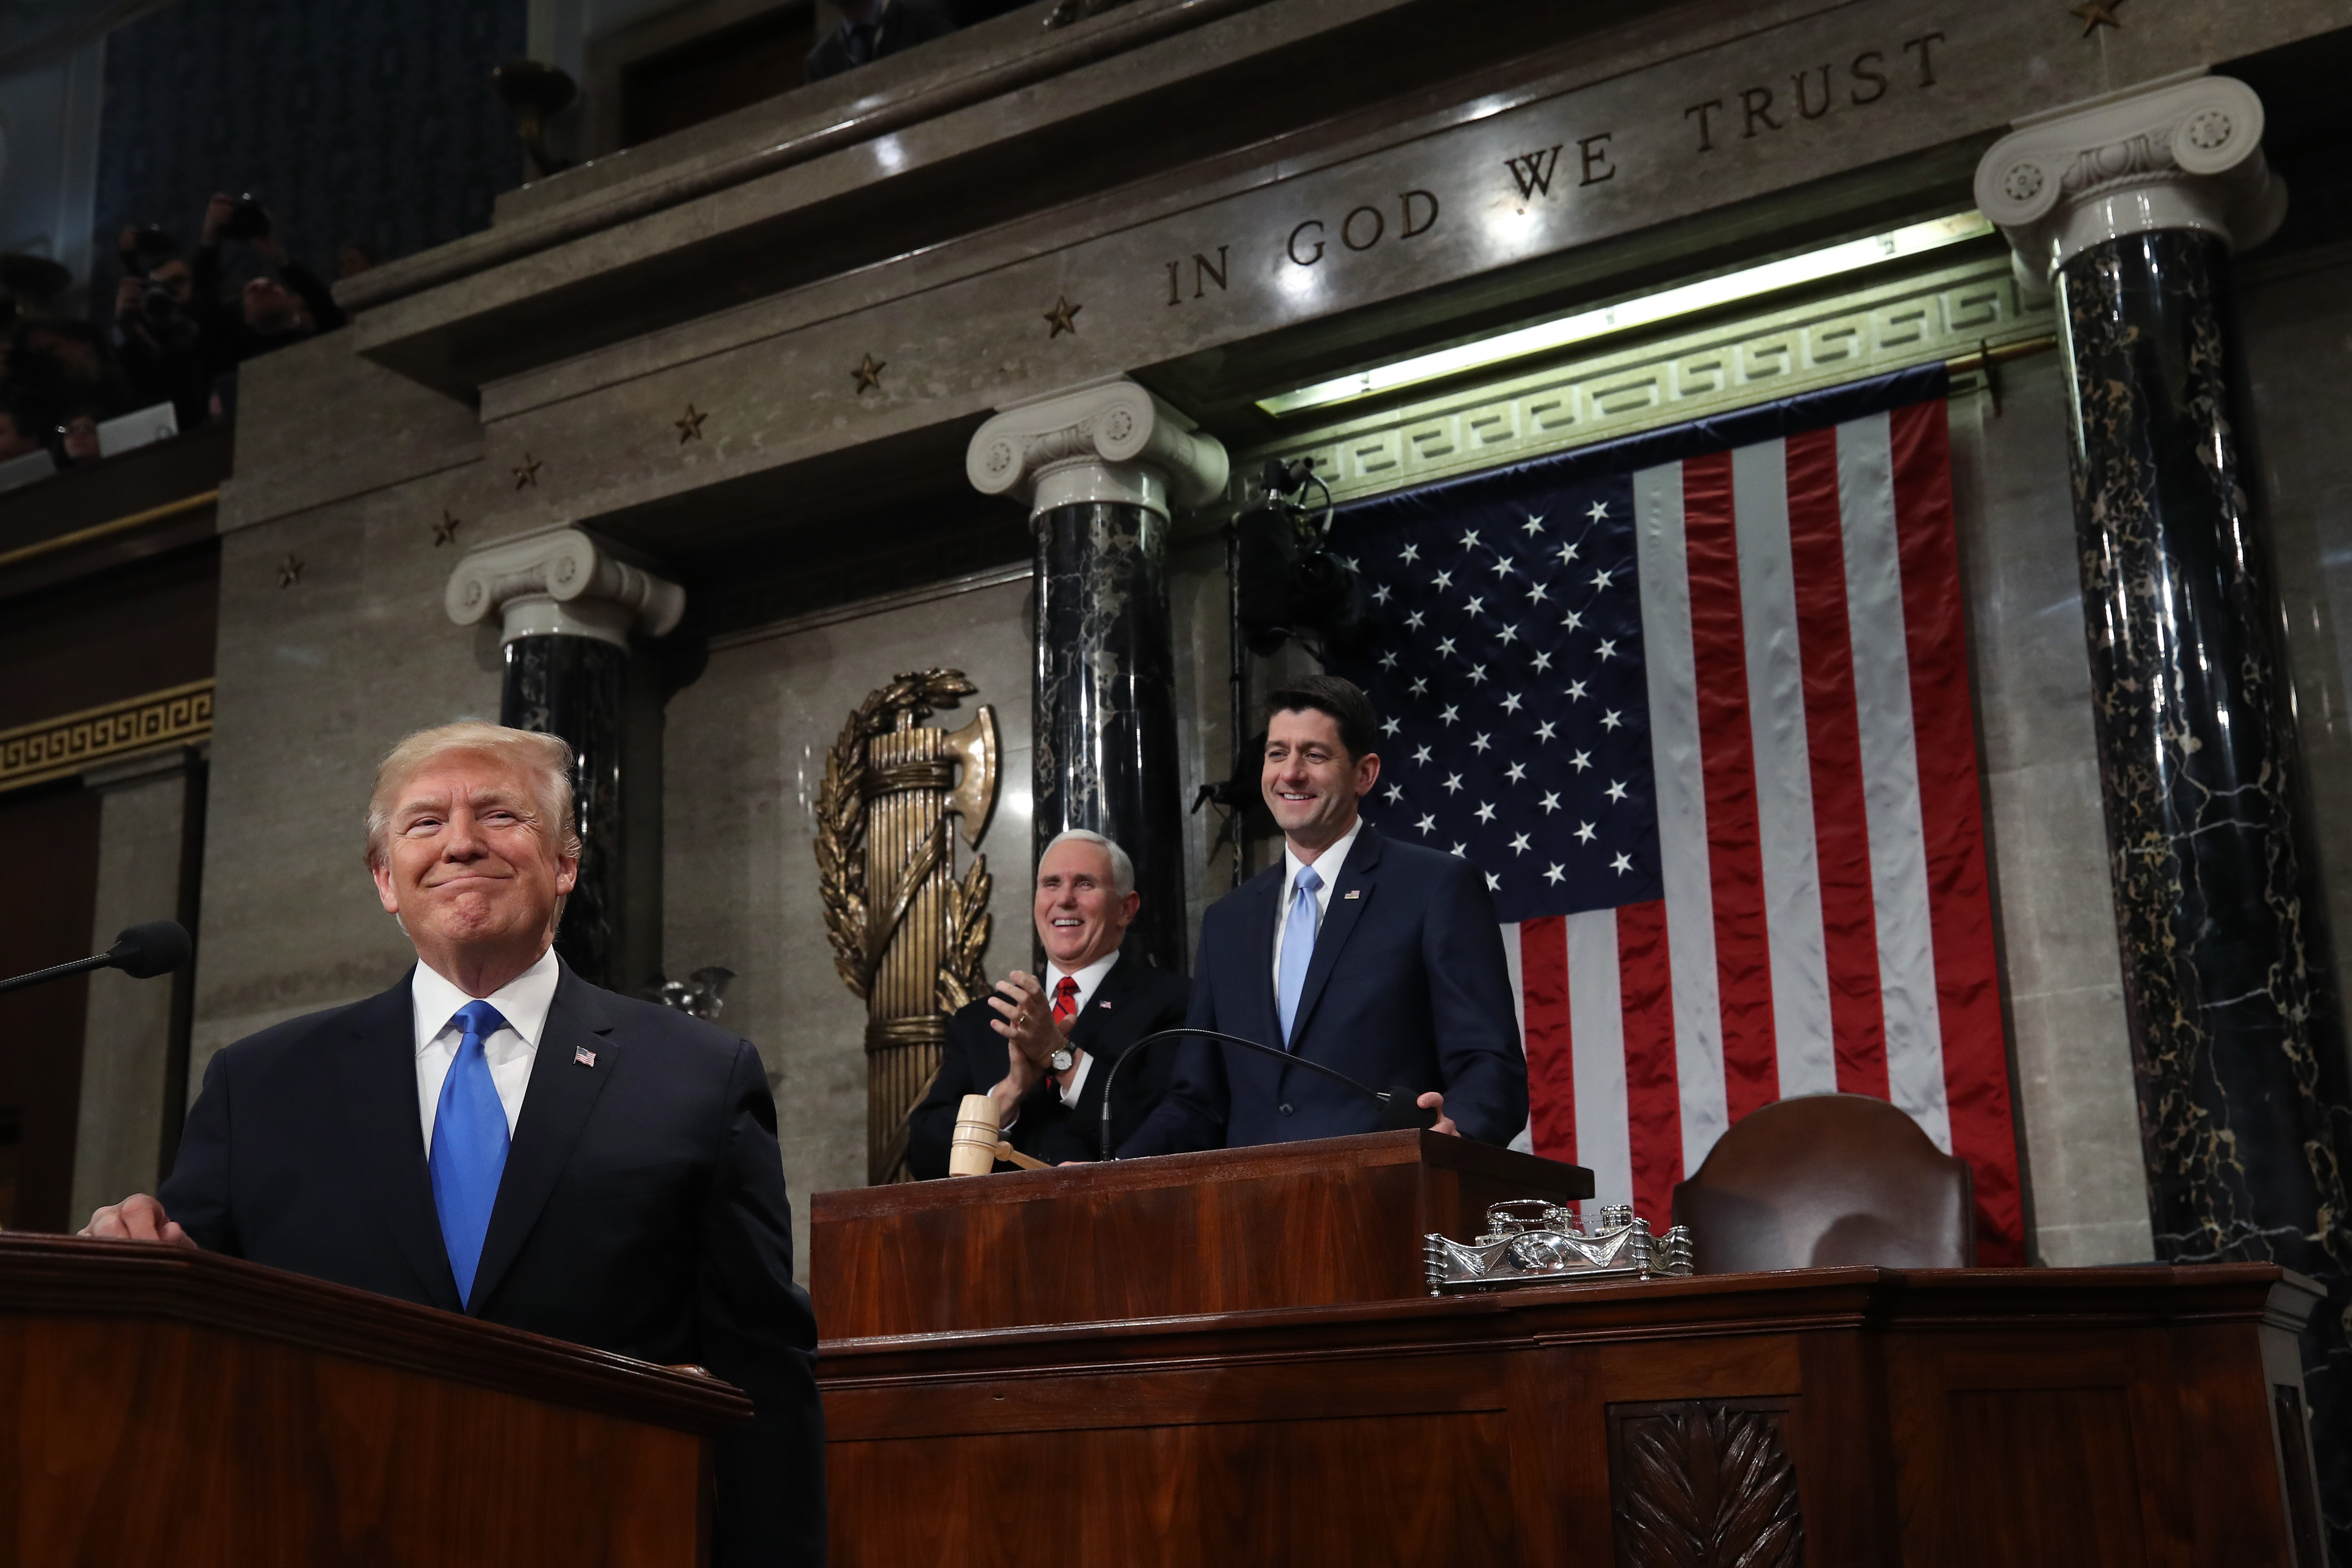 President Trump speaks during his first State of the Union address